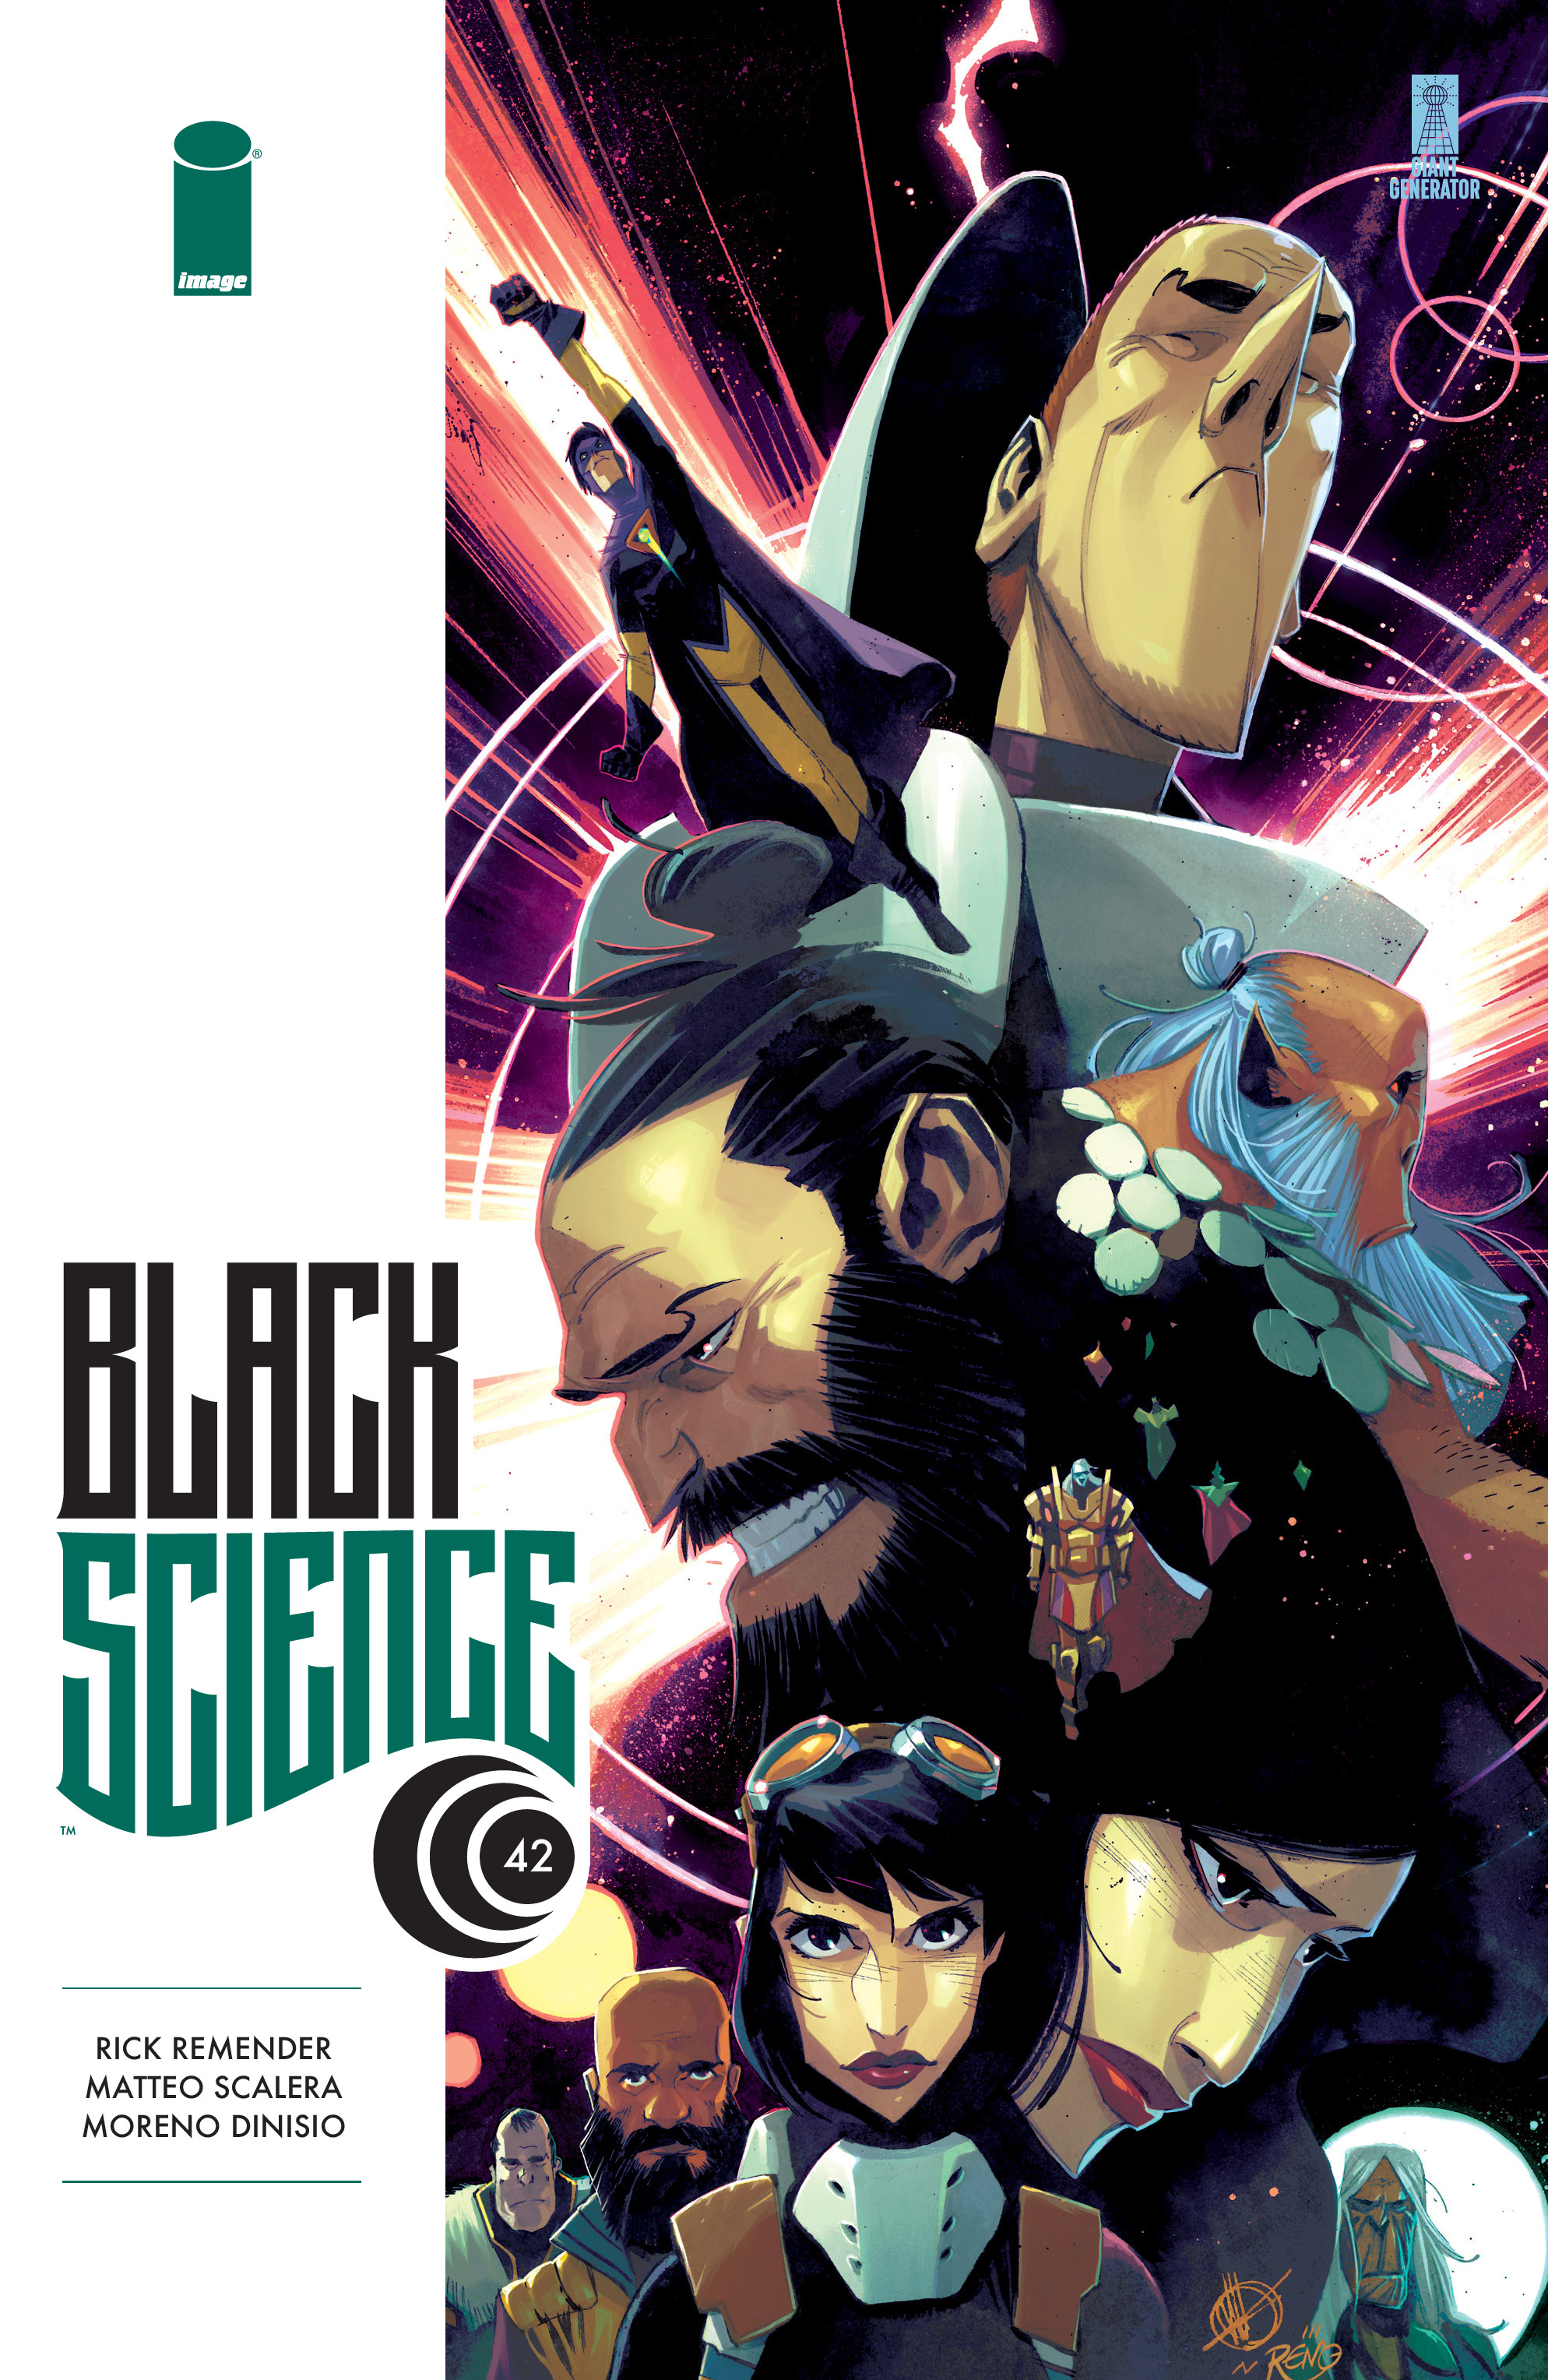 Read online Black Science comic -  Issue #42 - 1